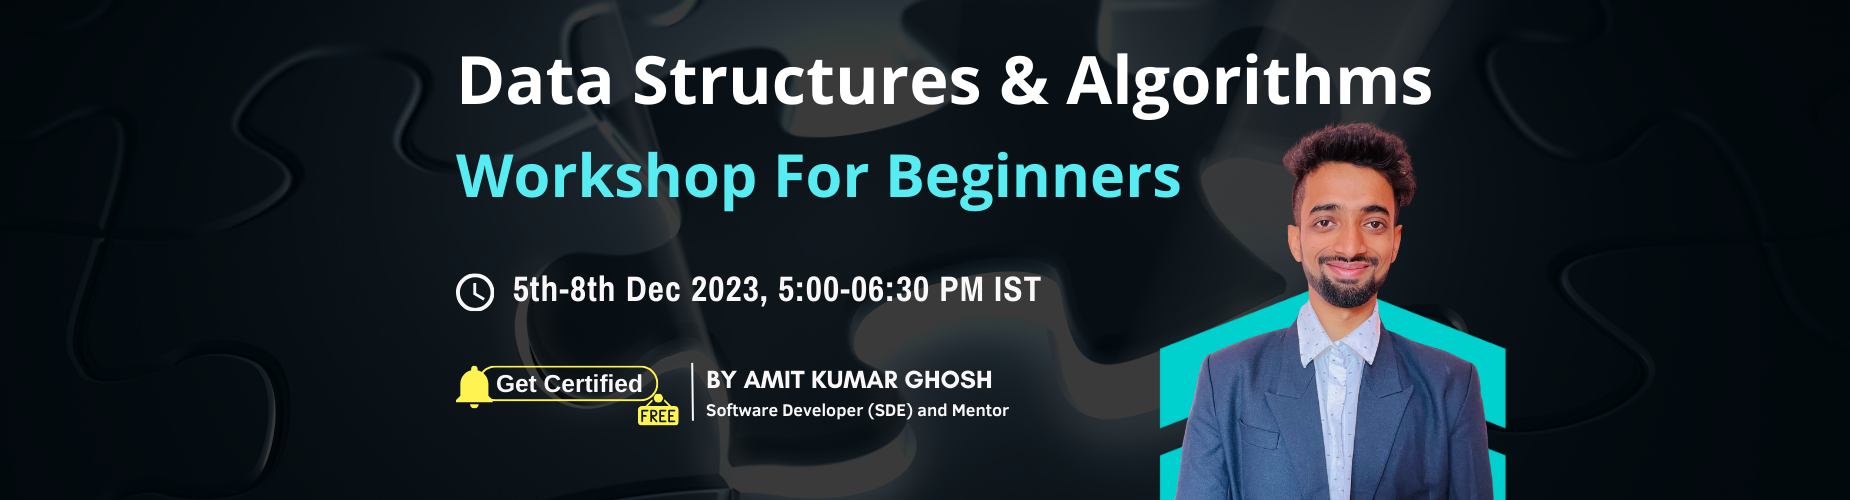 Data Structures & Algorithms For Beginners/Freshers